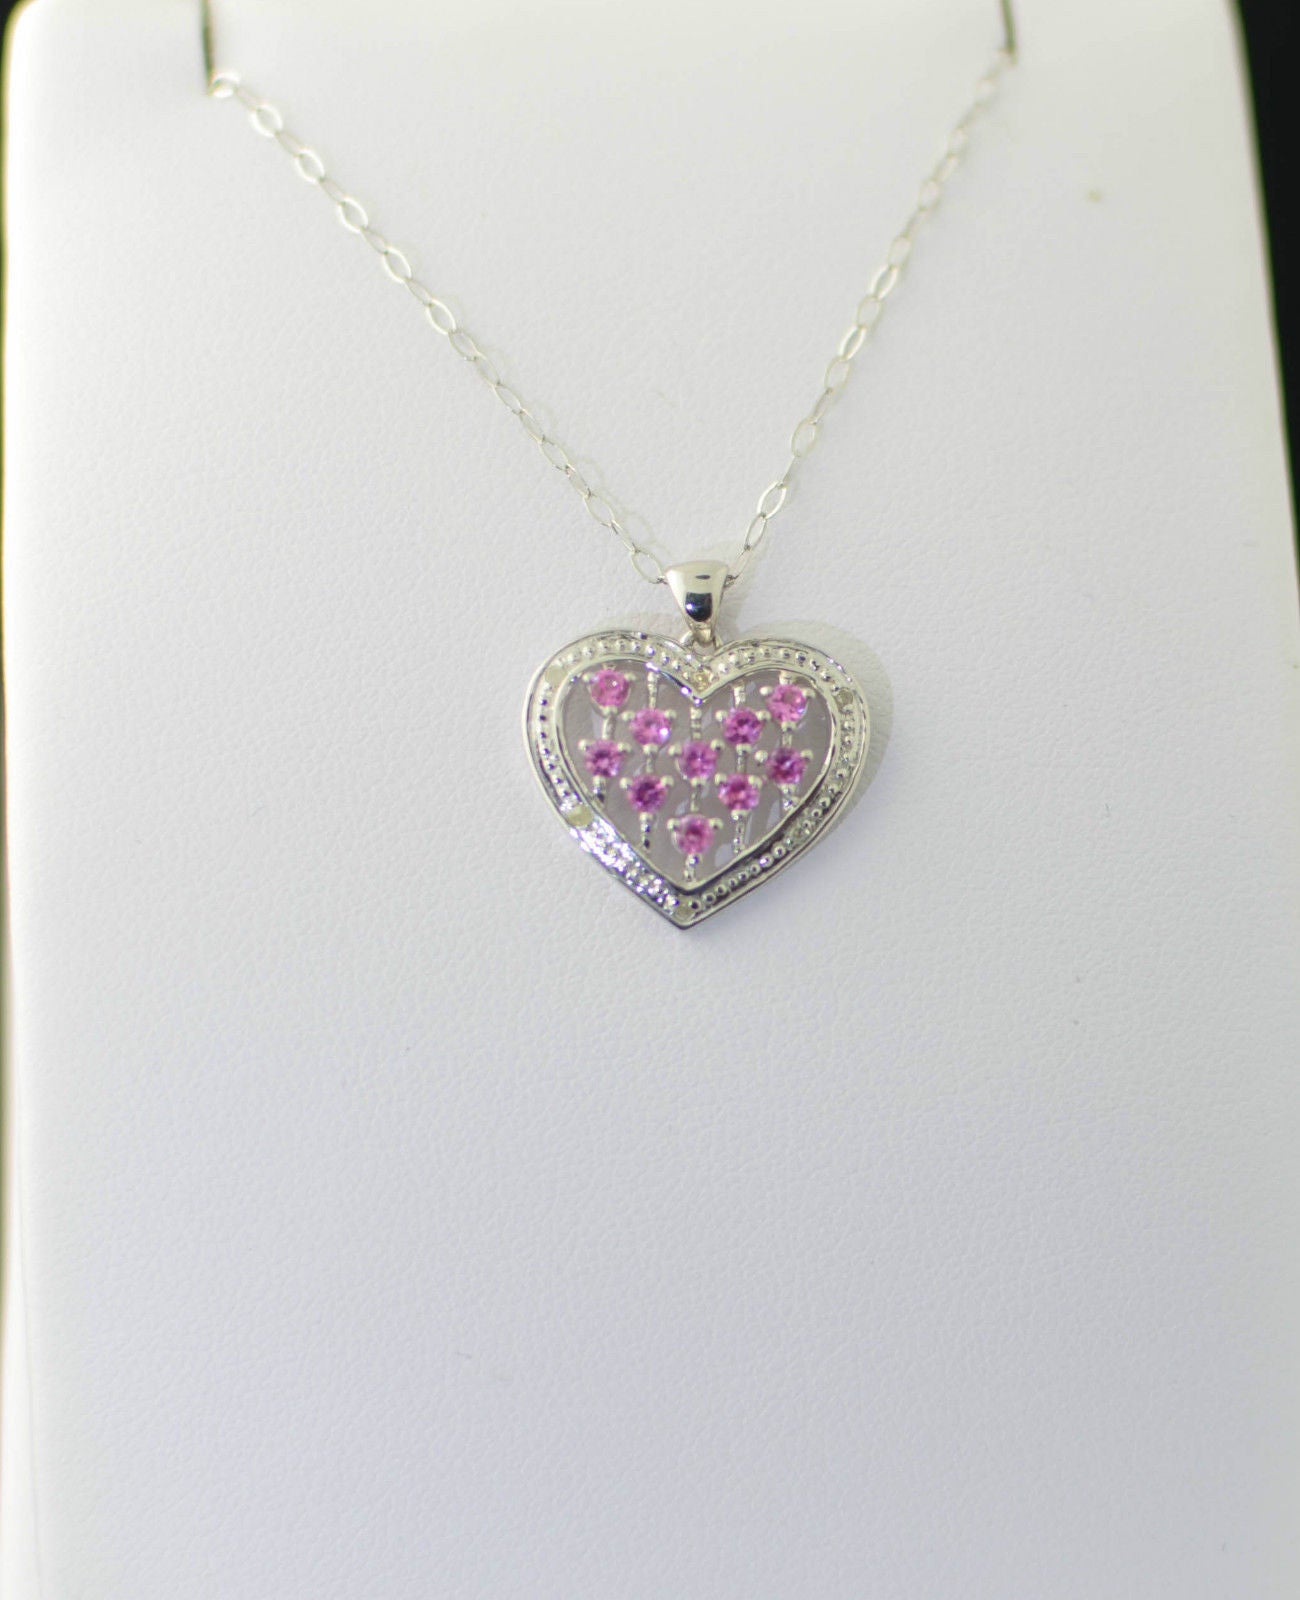 Heart Pink Sapphire Diamond Necklace 40829: quality jewelry at TRAXNYC -  buy online, best price in NYC!